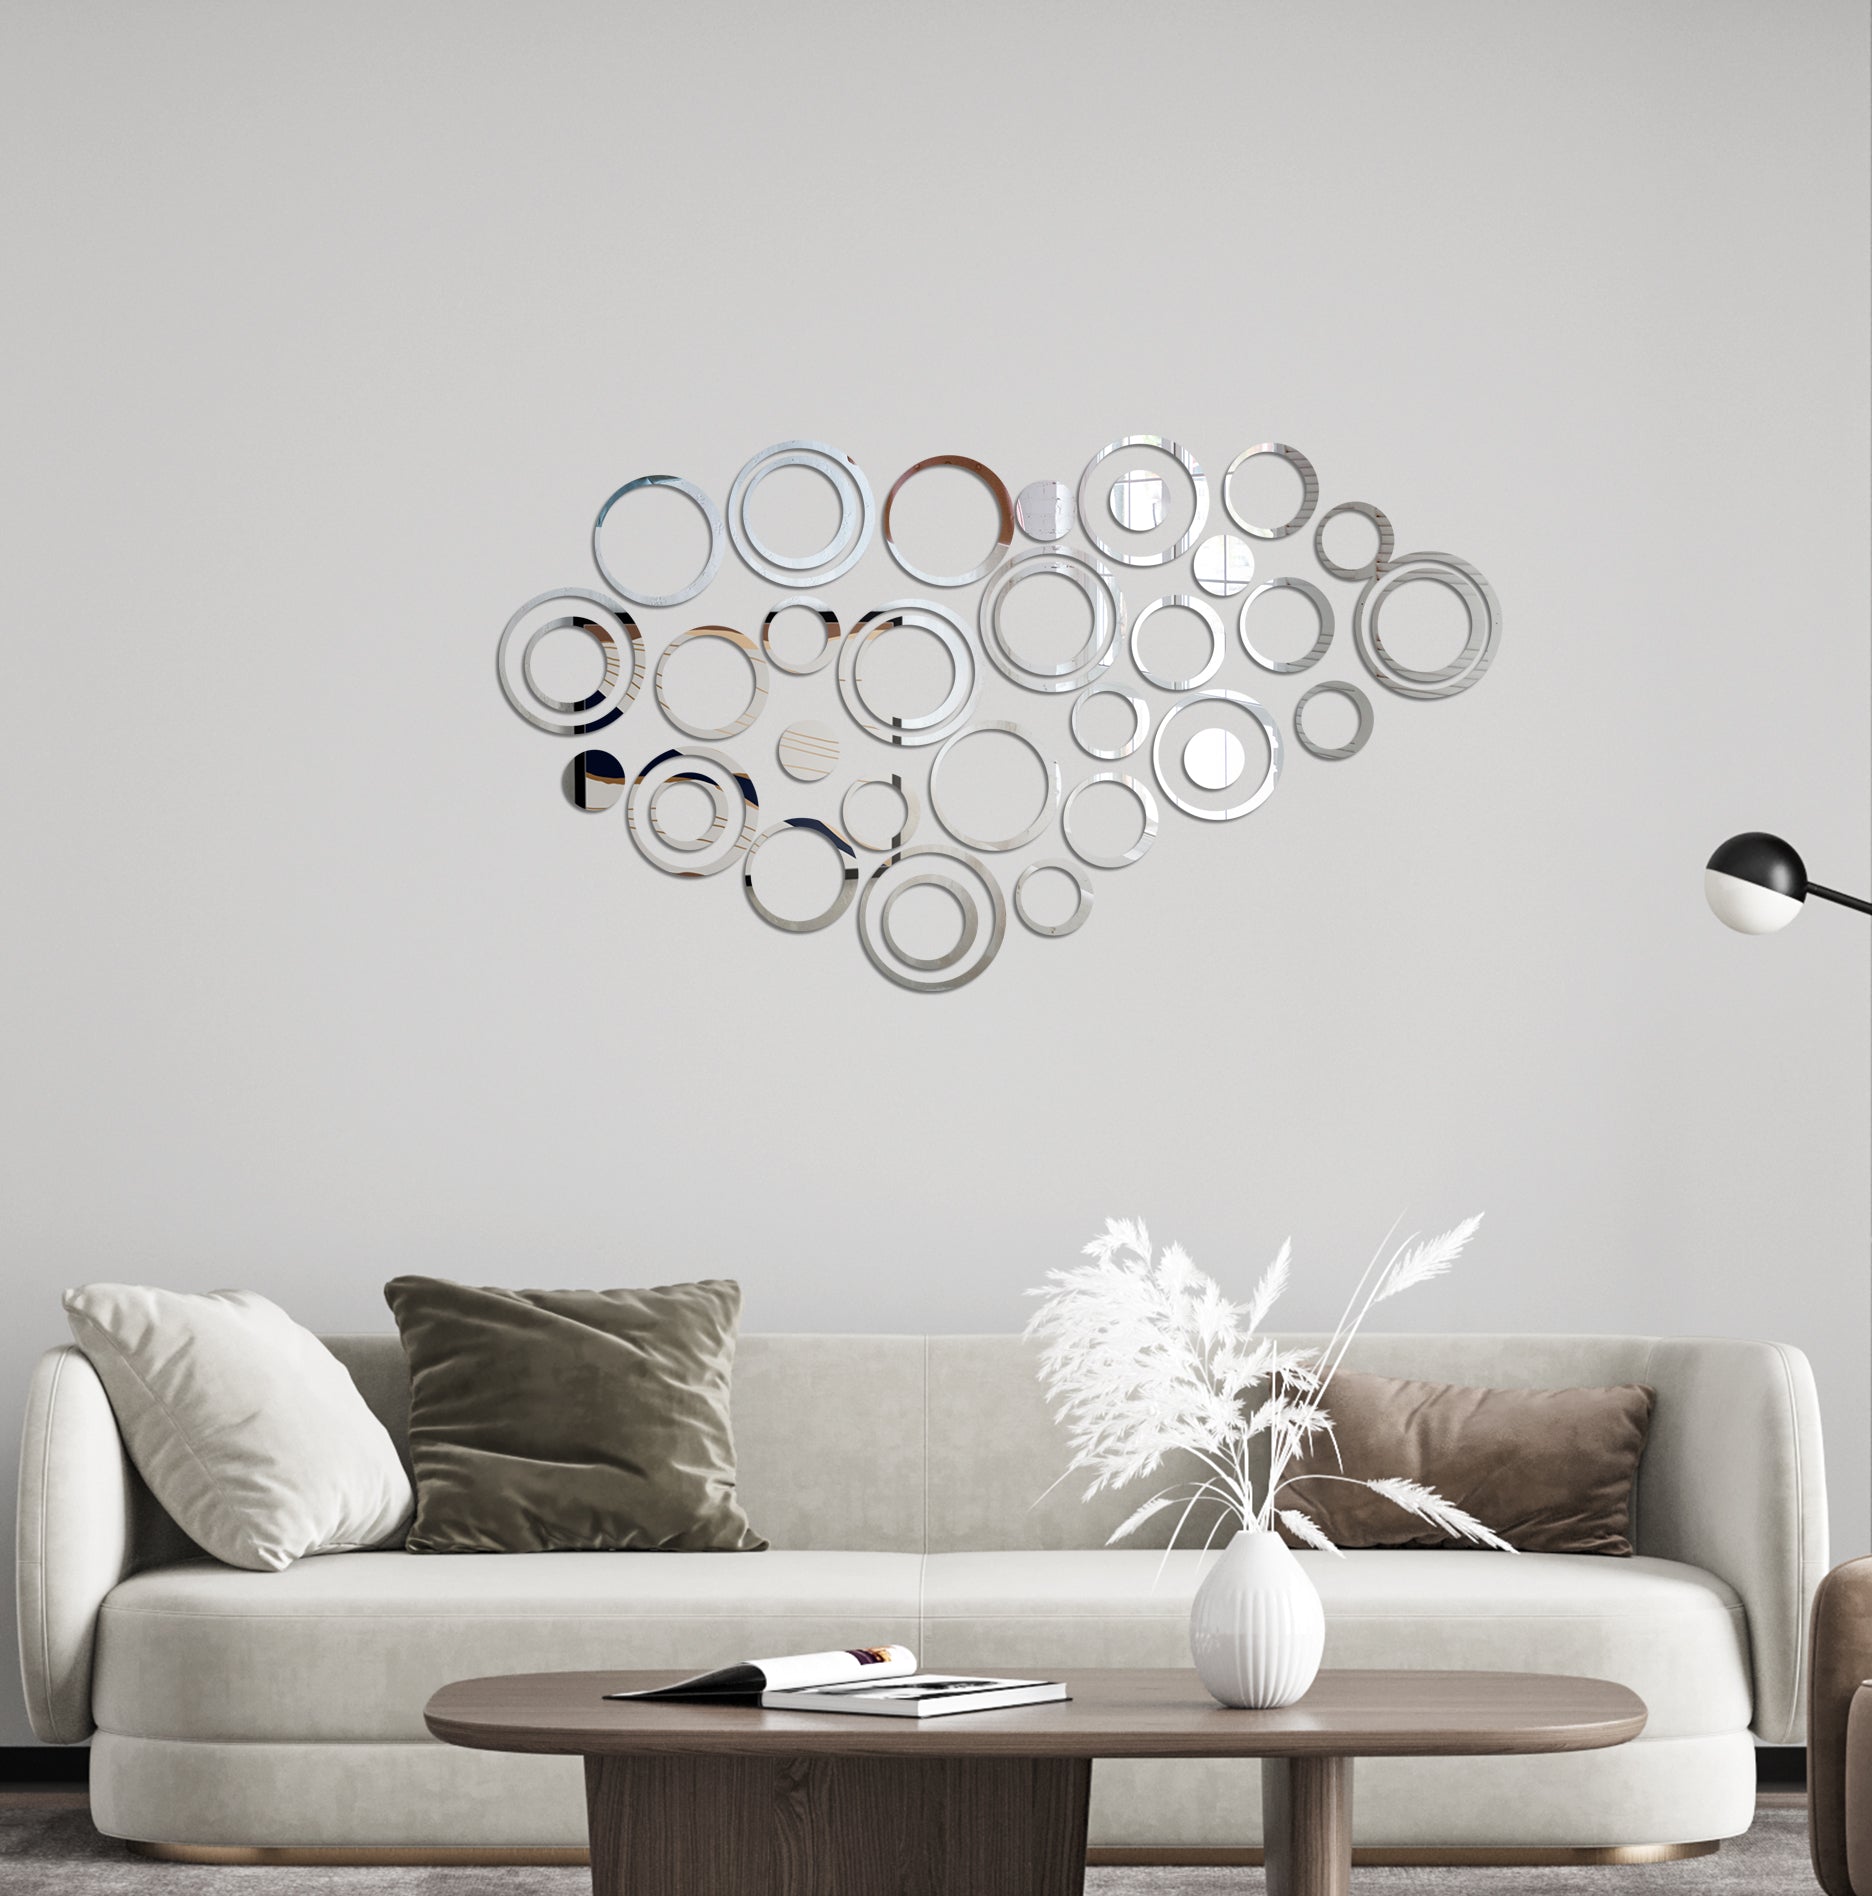 Meraki Mart Non Glass Home and Circle Design Wall Stickers 3D Acrylic Wall  Mirror Sticker DIY Tiles Wall Decoration Decor Art for Living Room, Home,  Bedroom, Office and Washroom - 28 Pcs, Silver